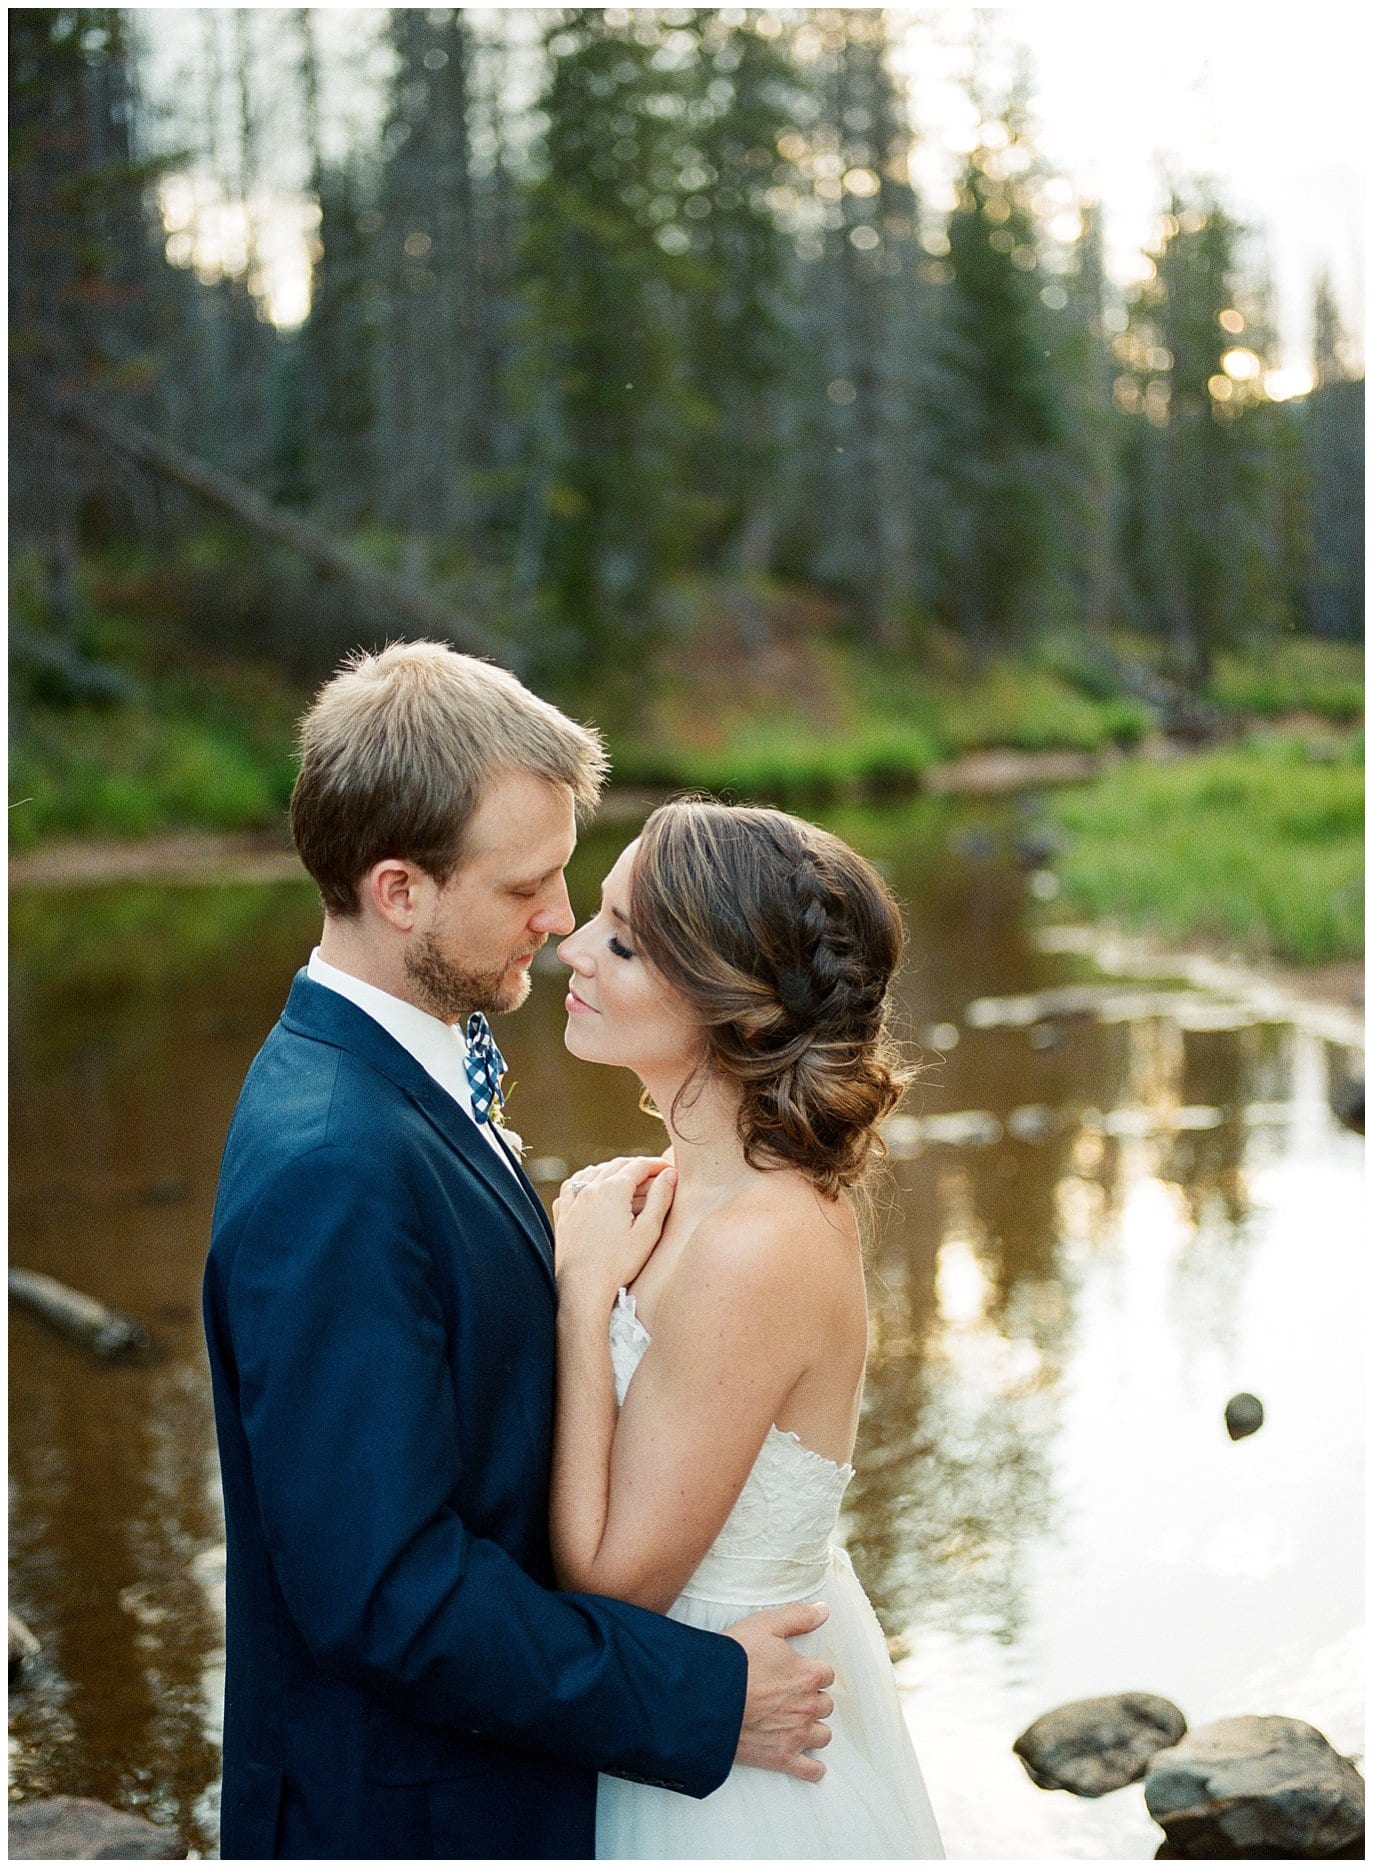 romantic kiss by colorado river on wedding day at Piney River Ranch intimate wedding by Beaver Creek wedding photographer Jennie Crate Photographer